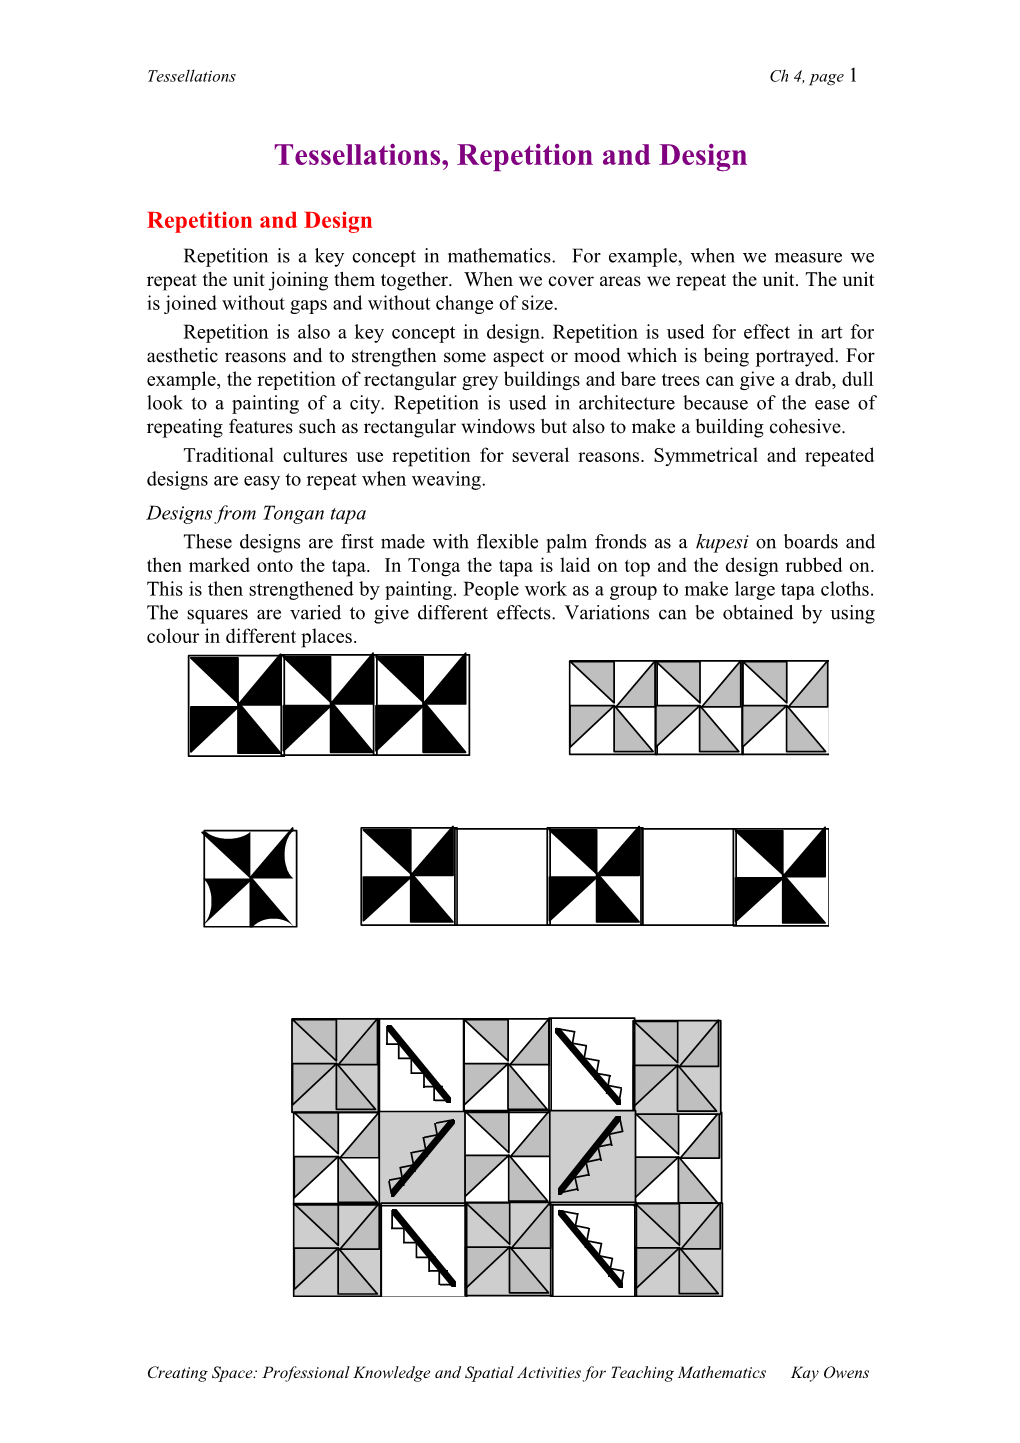 Tessellations, Repetition and Design